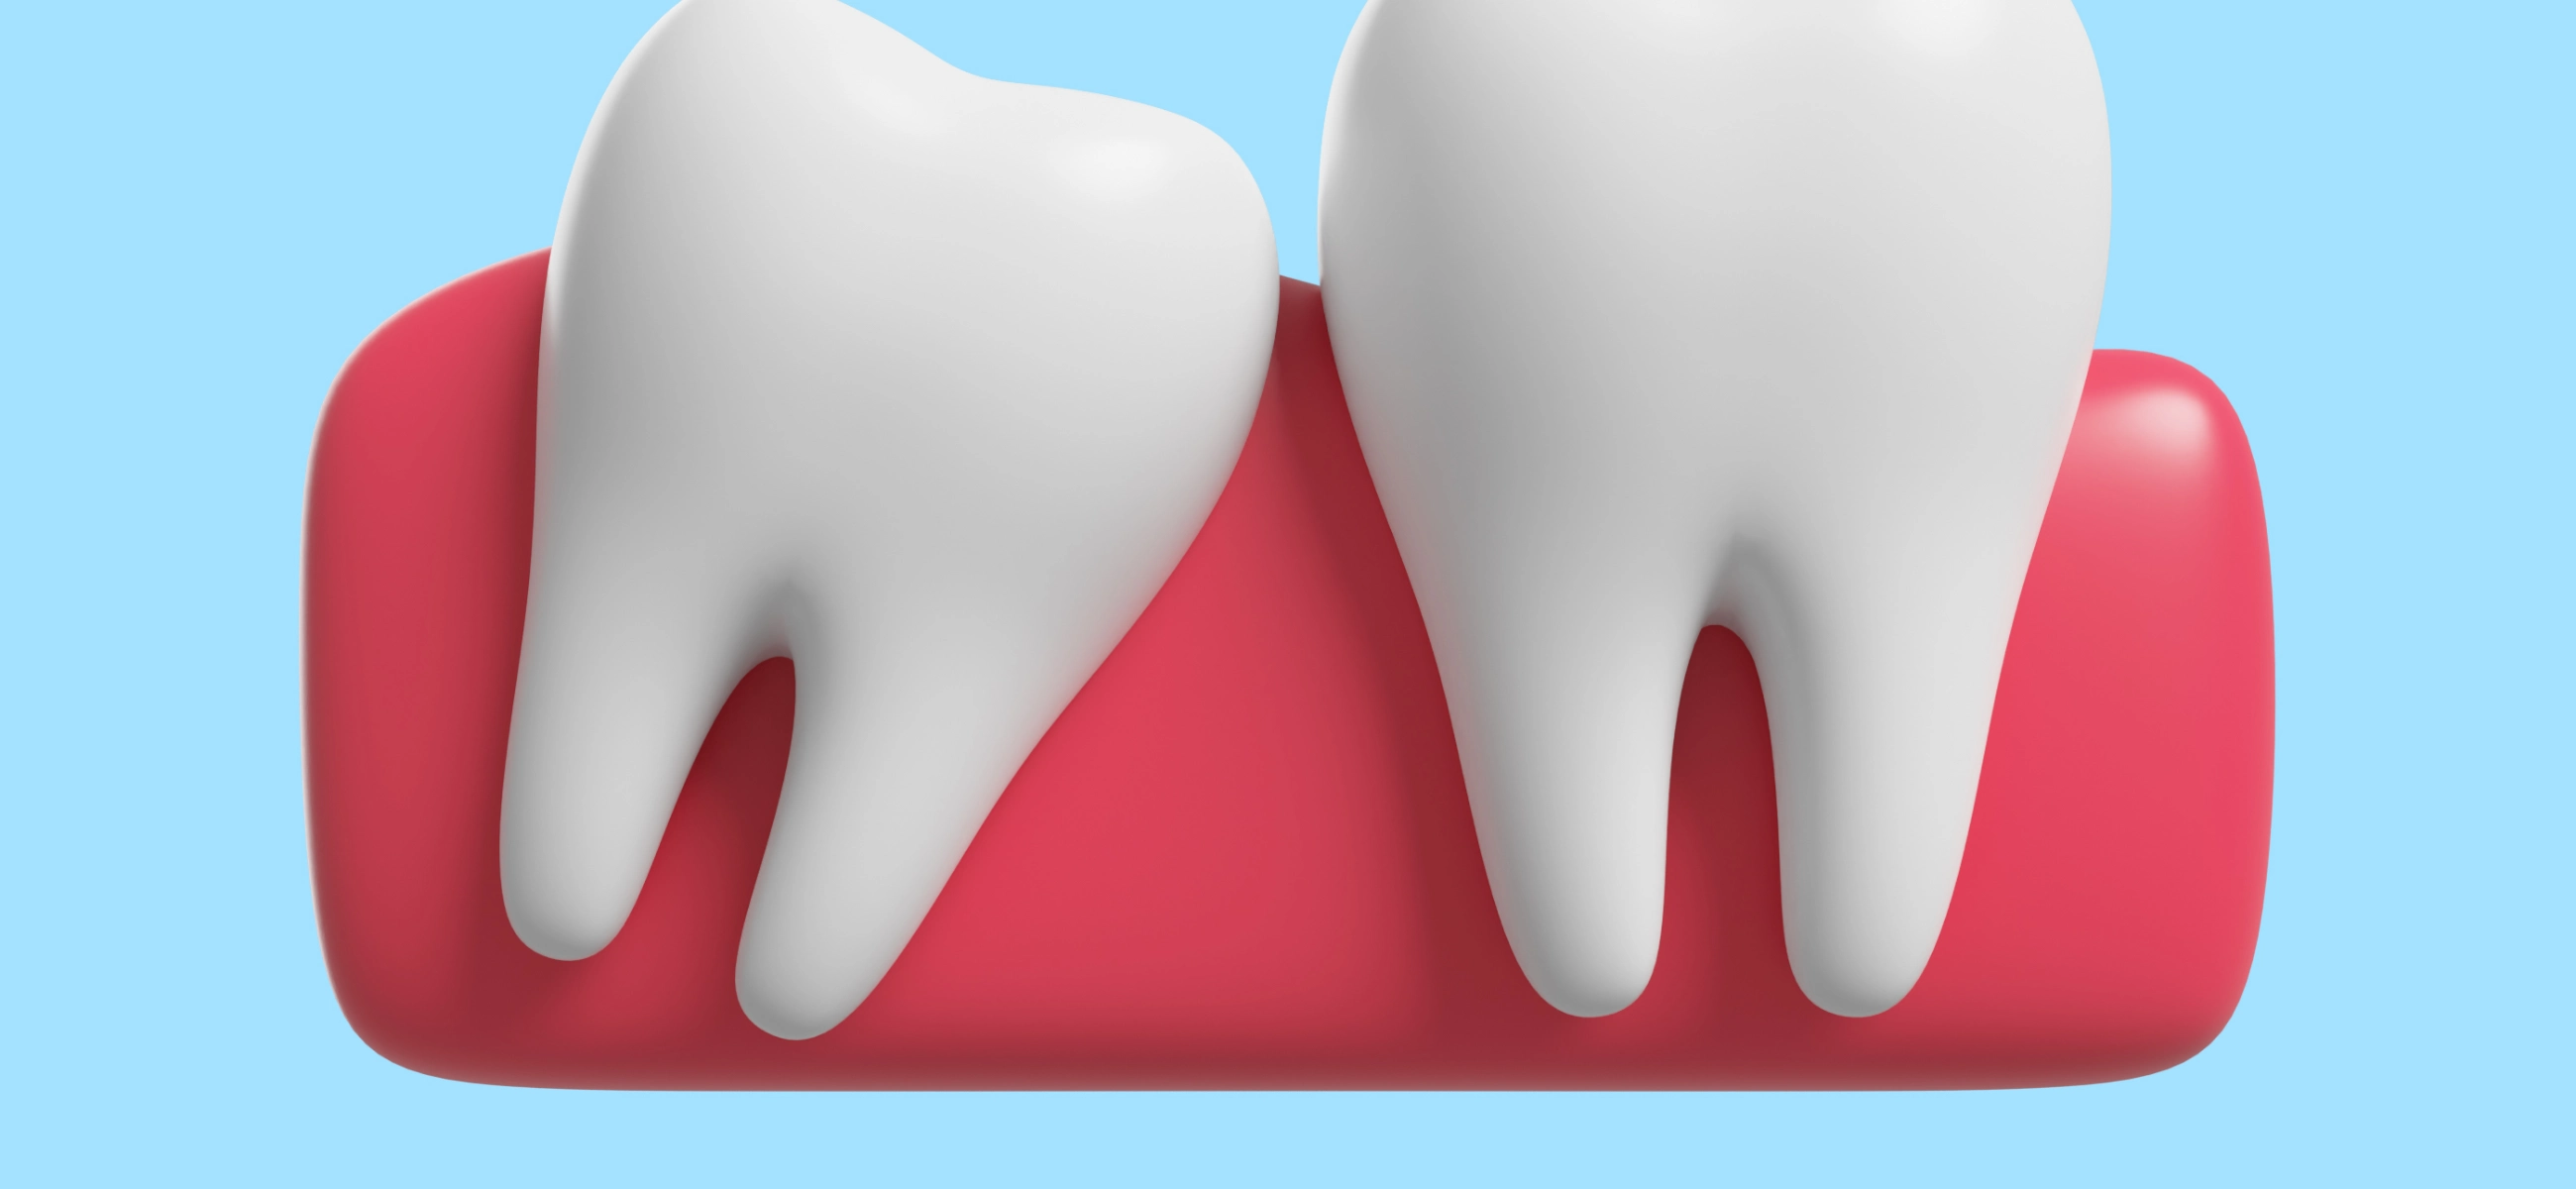 The naturally occurring process of erupting teeth - what to know and when to seek help